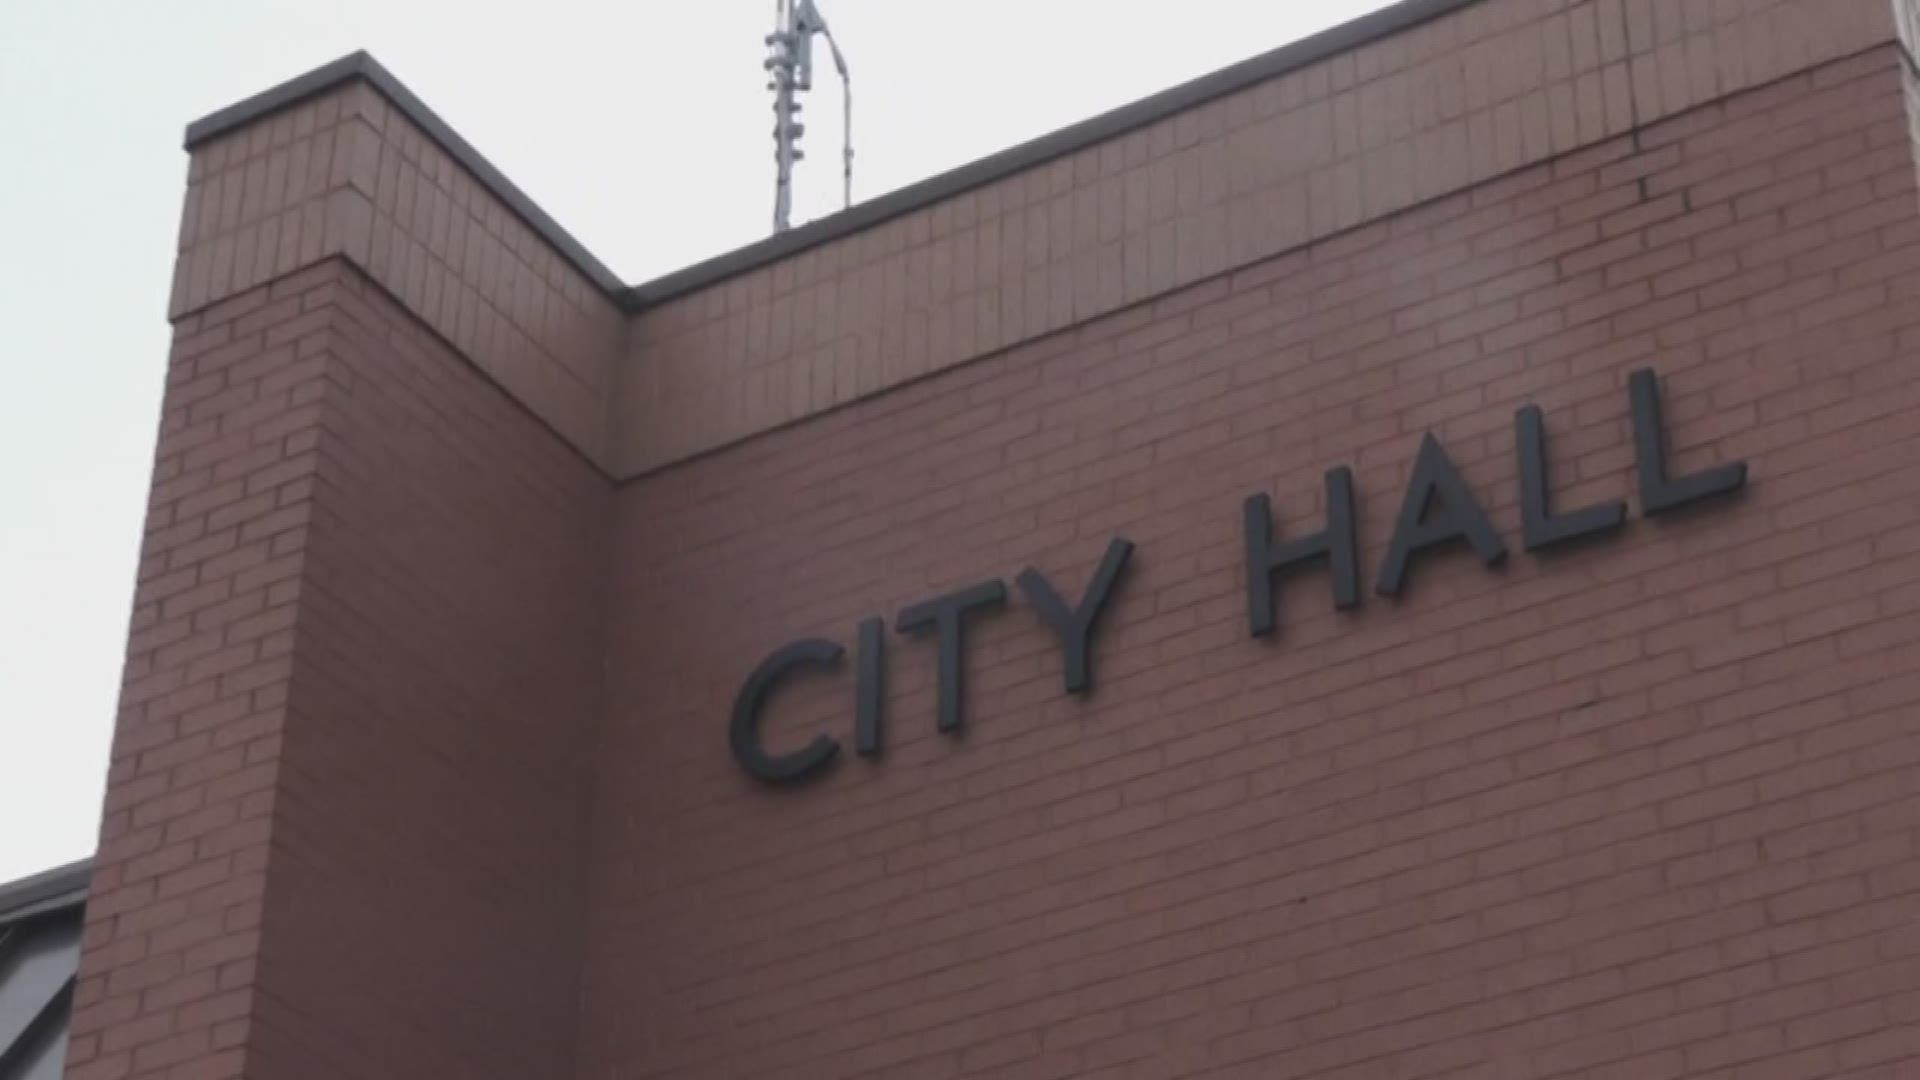 Cabot residents are worried about their bills after the city council proposed a waste water rate increase. The mayor vetoed it, but that might not be the end of it.